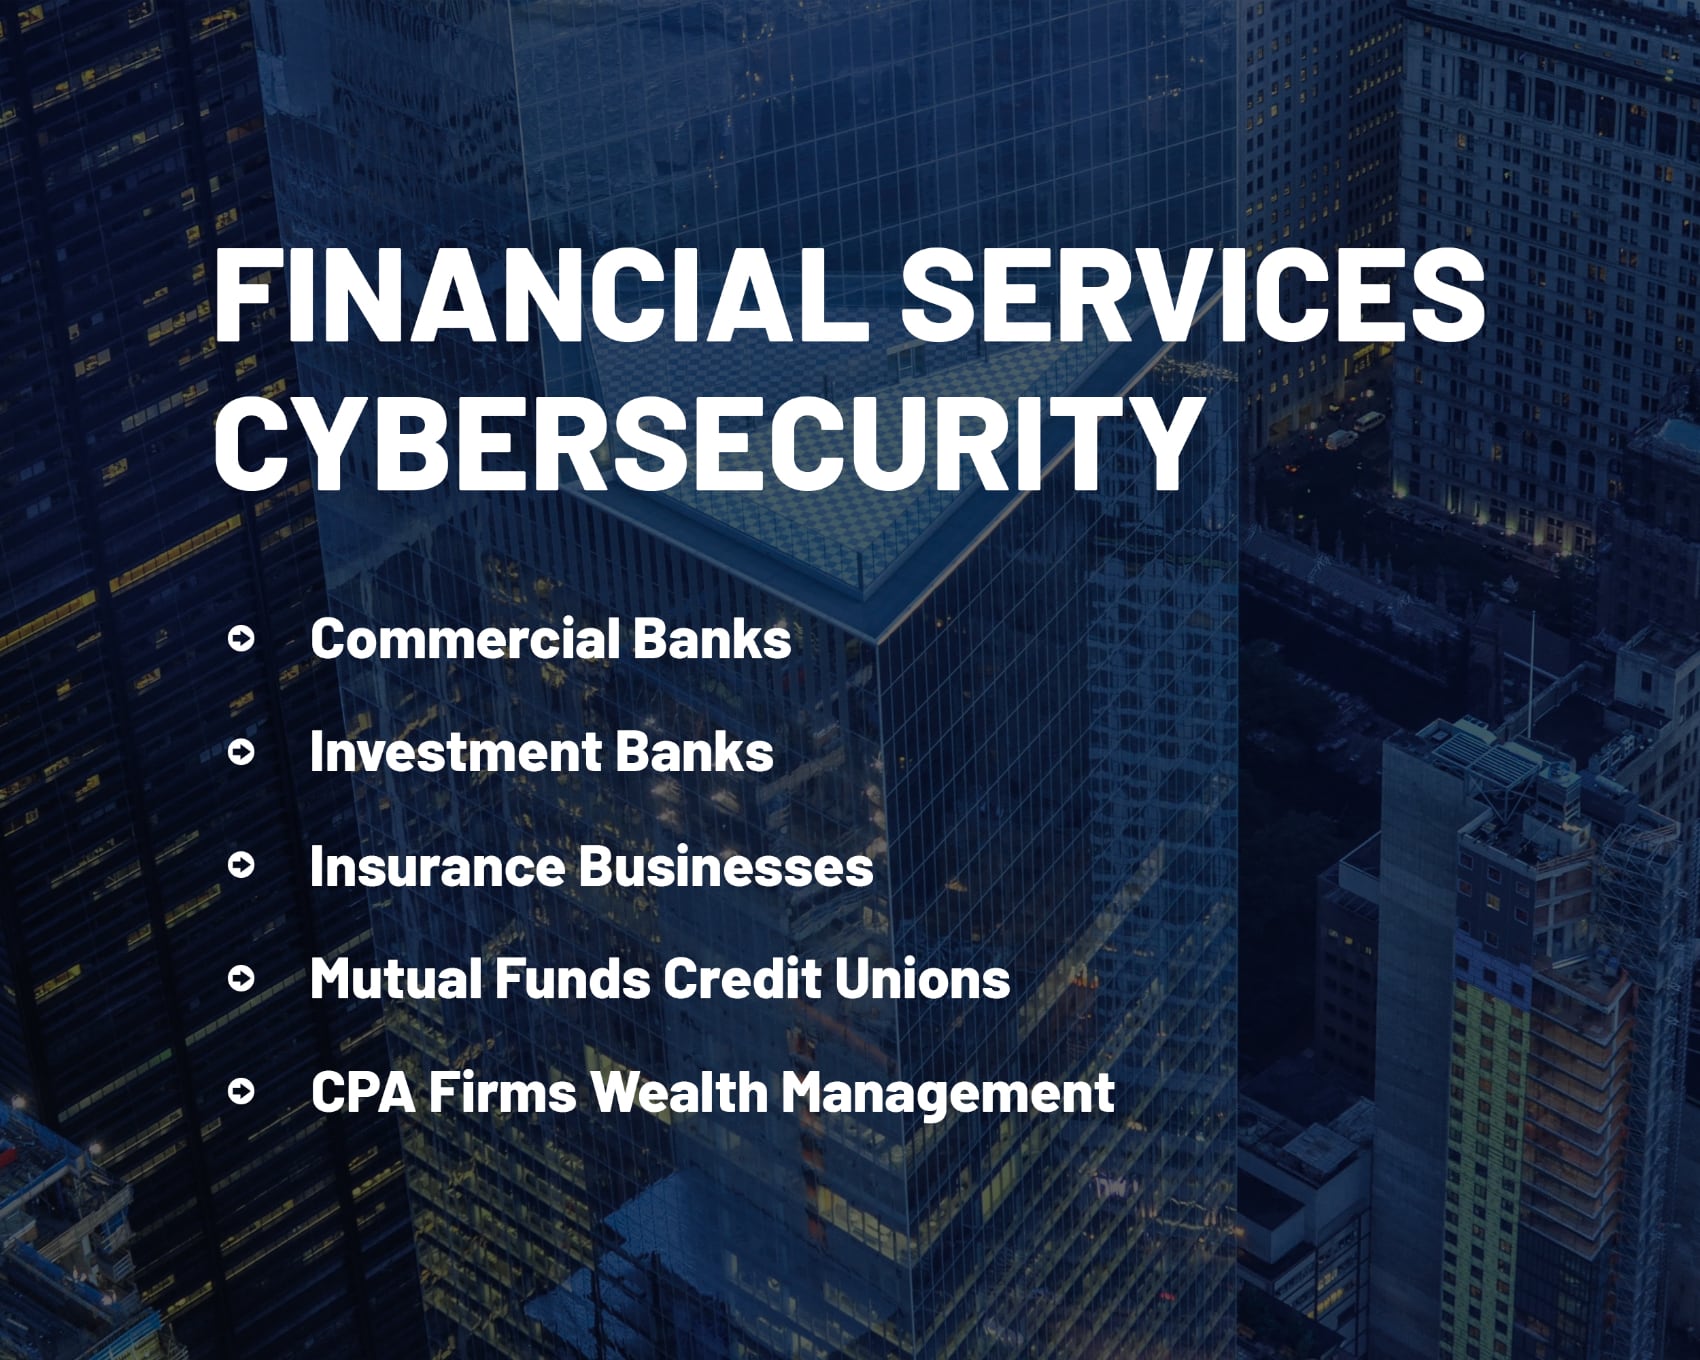 Financial Services Cybersecurity categories